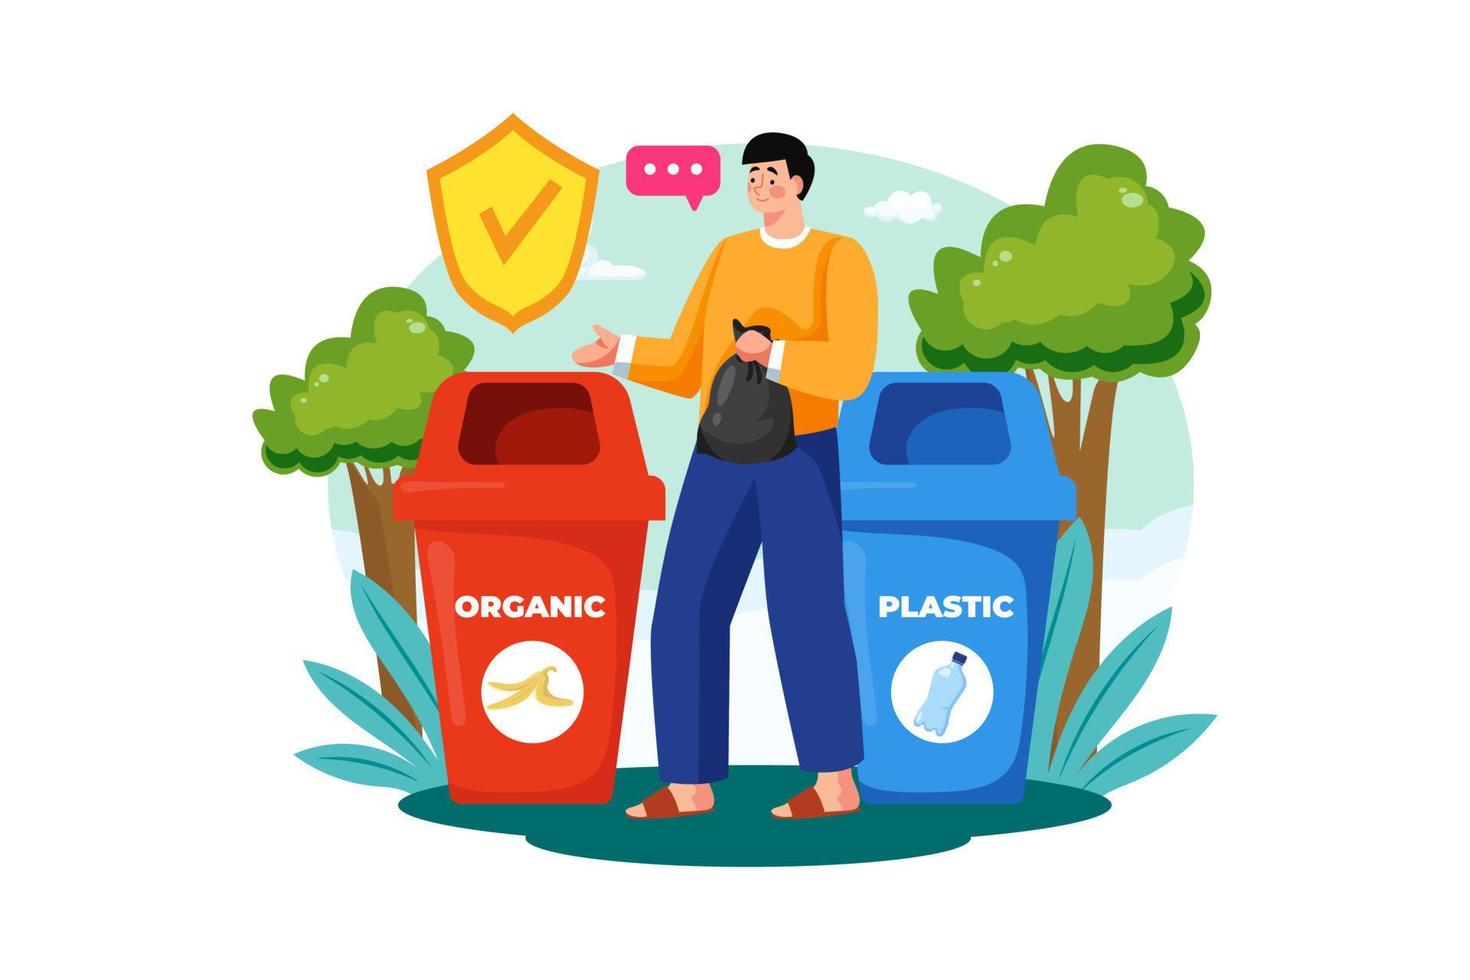 Throw trash into the right bin Illustration concept on white background vector